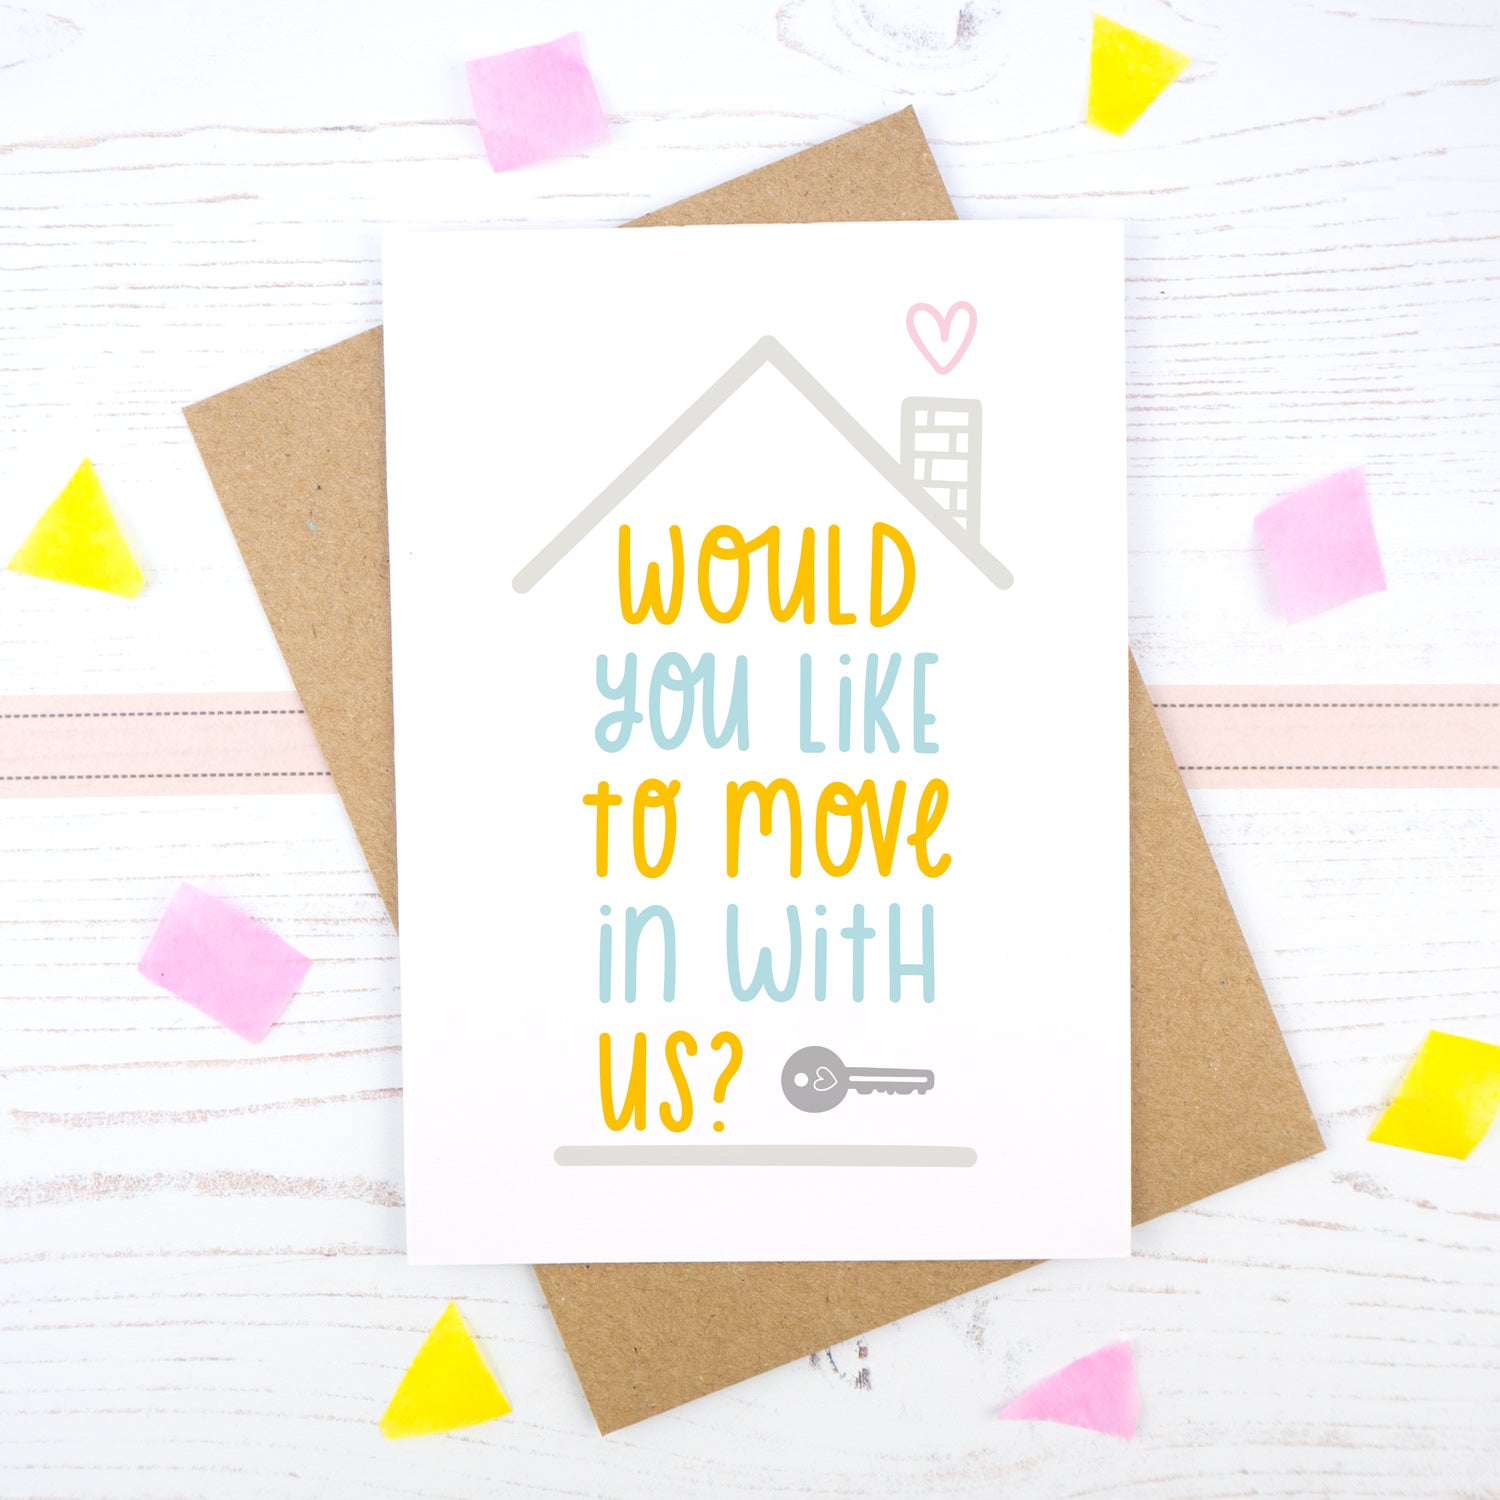 Would you like to move in with us card in blue and orange, under a grey roof and a dark grey key.